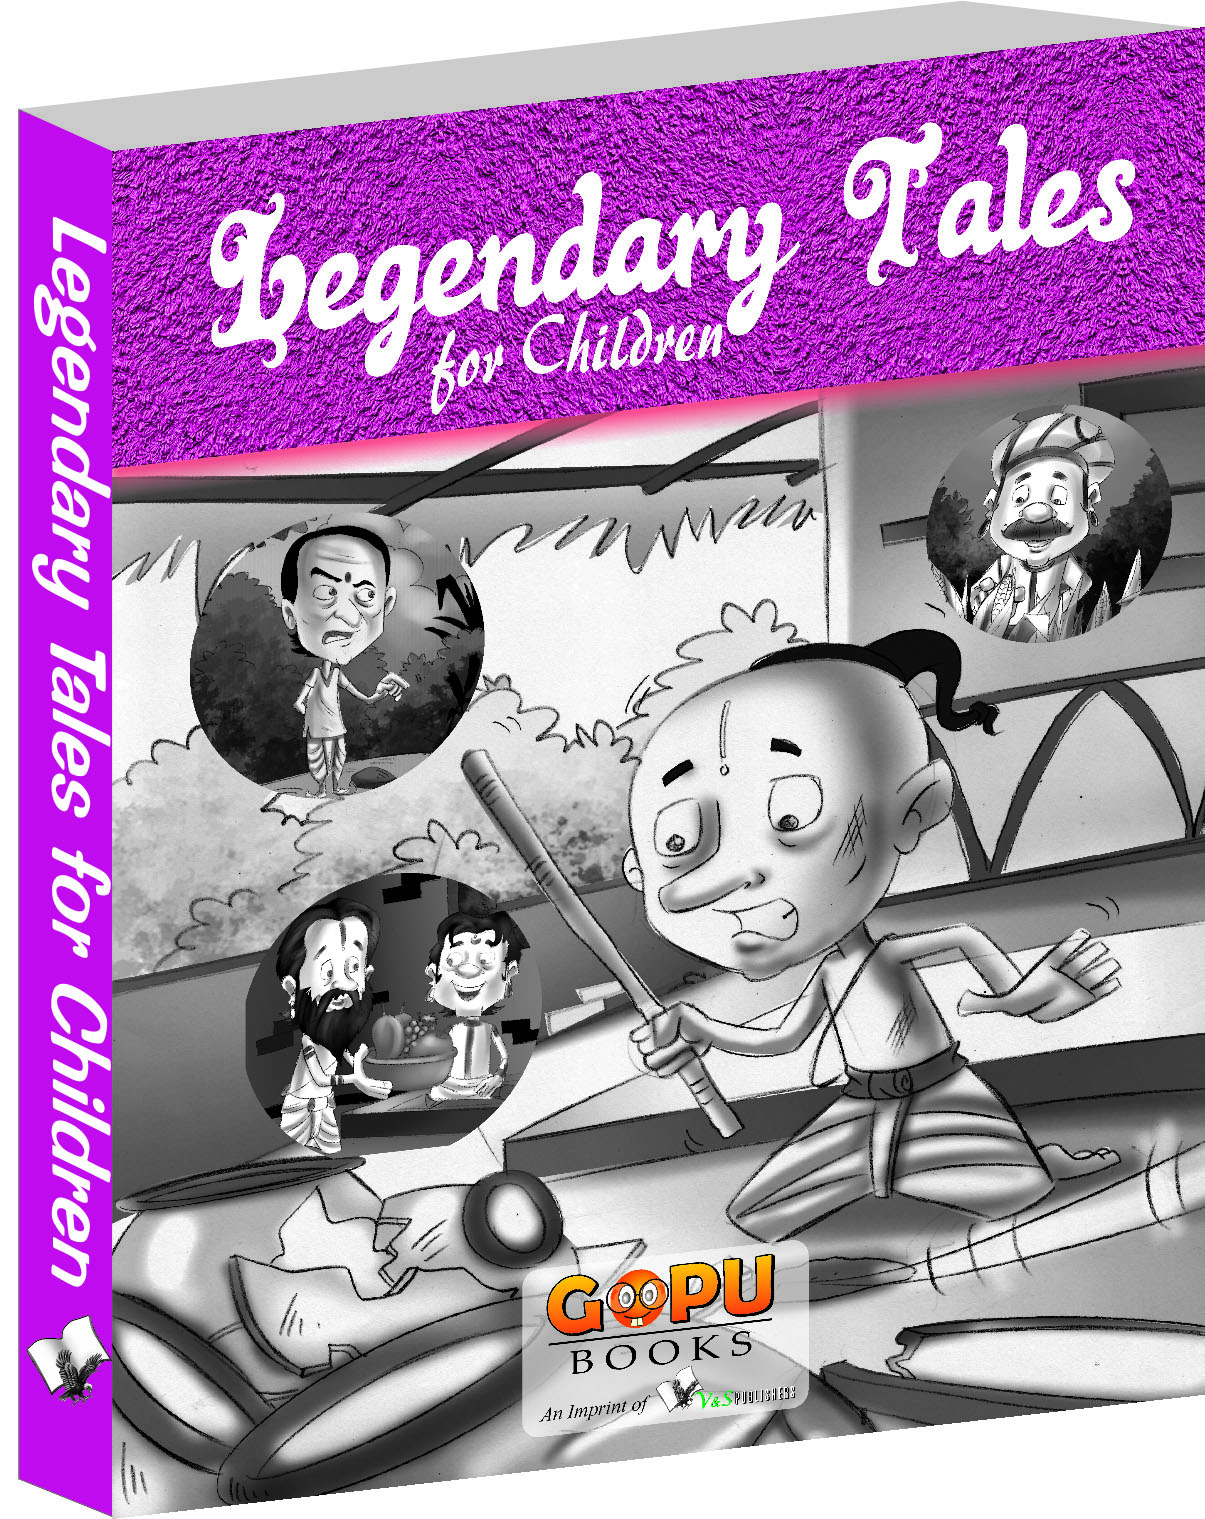 Legendary Tales -Short stories for young children